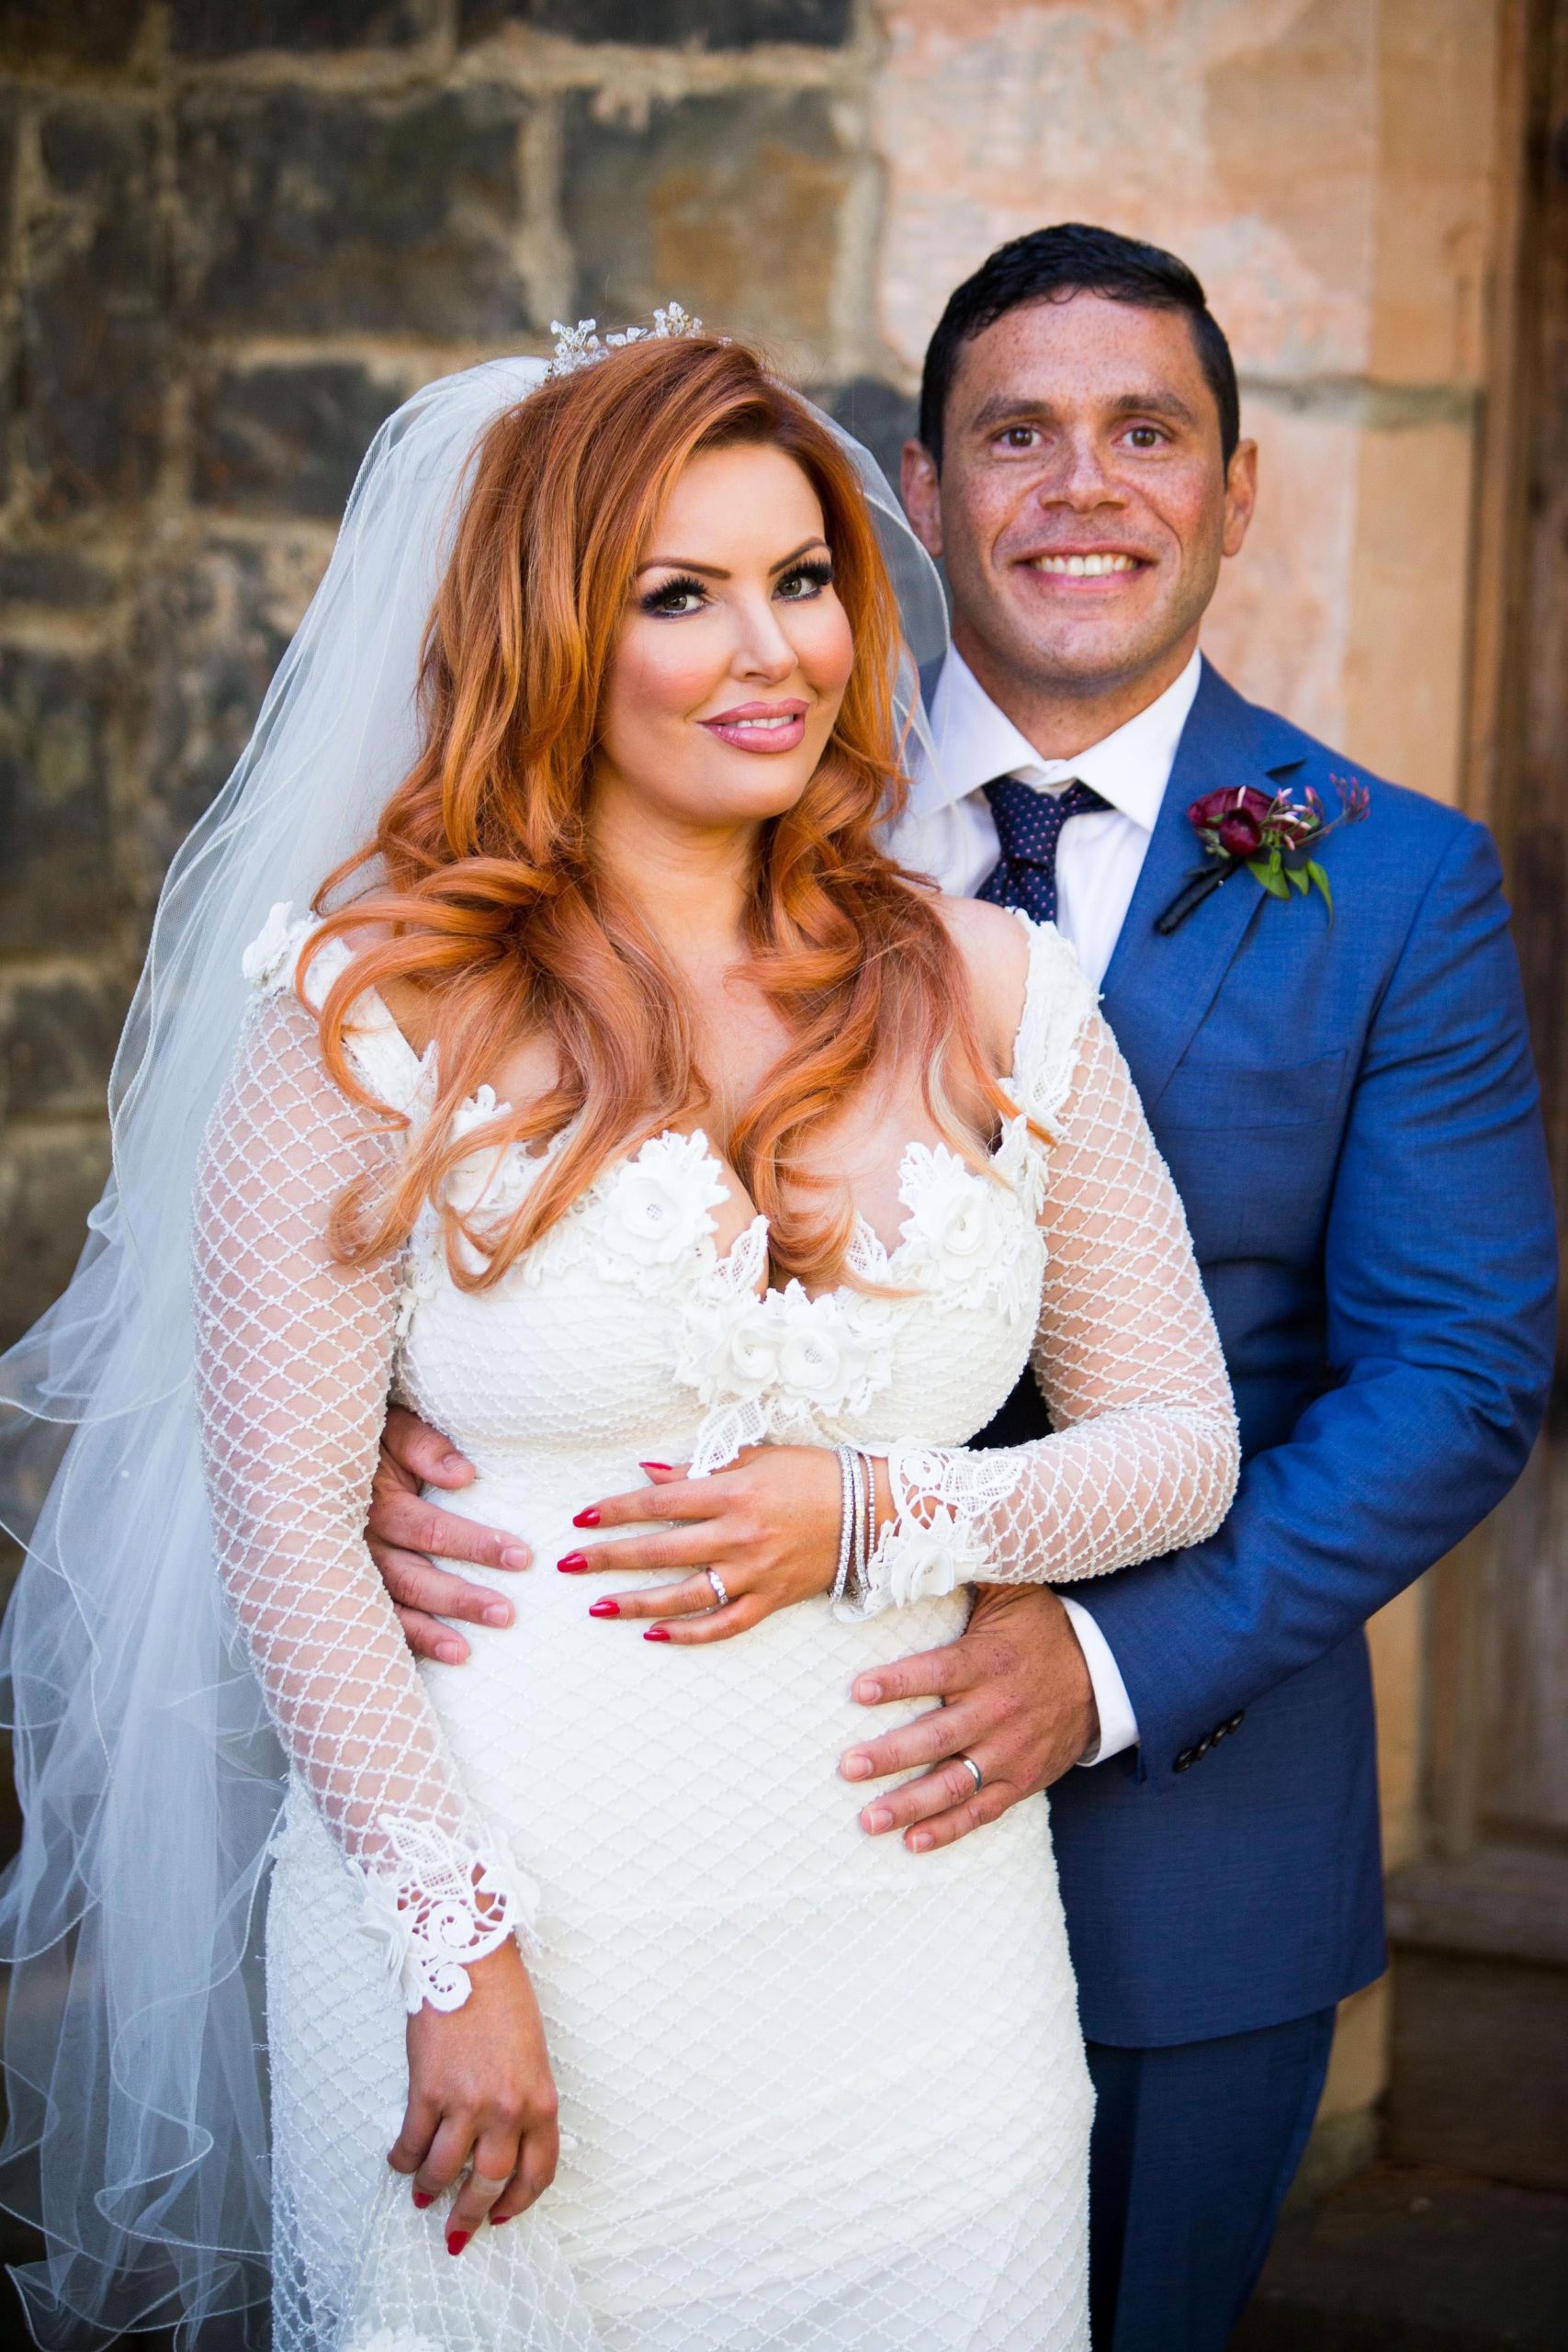 Married At First Sight Australia Couples- Where Are They Now? - Married At First Sight 2021 Where Are They Now